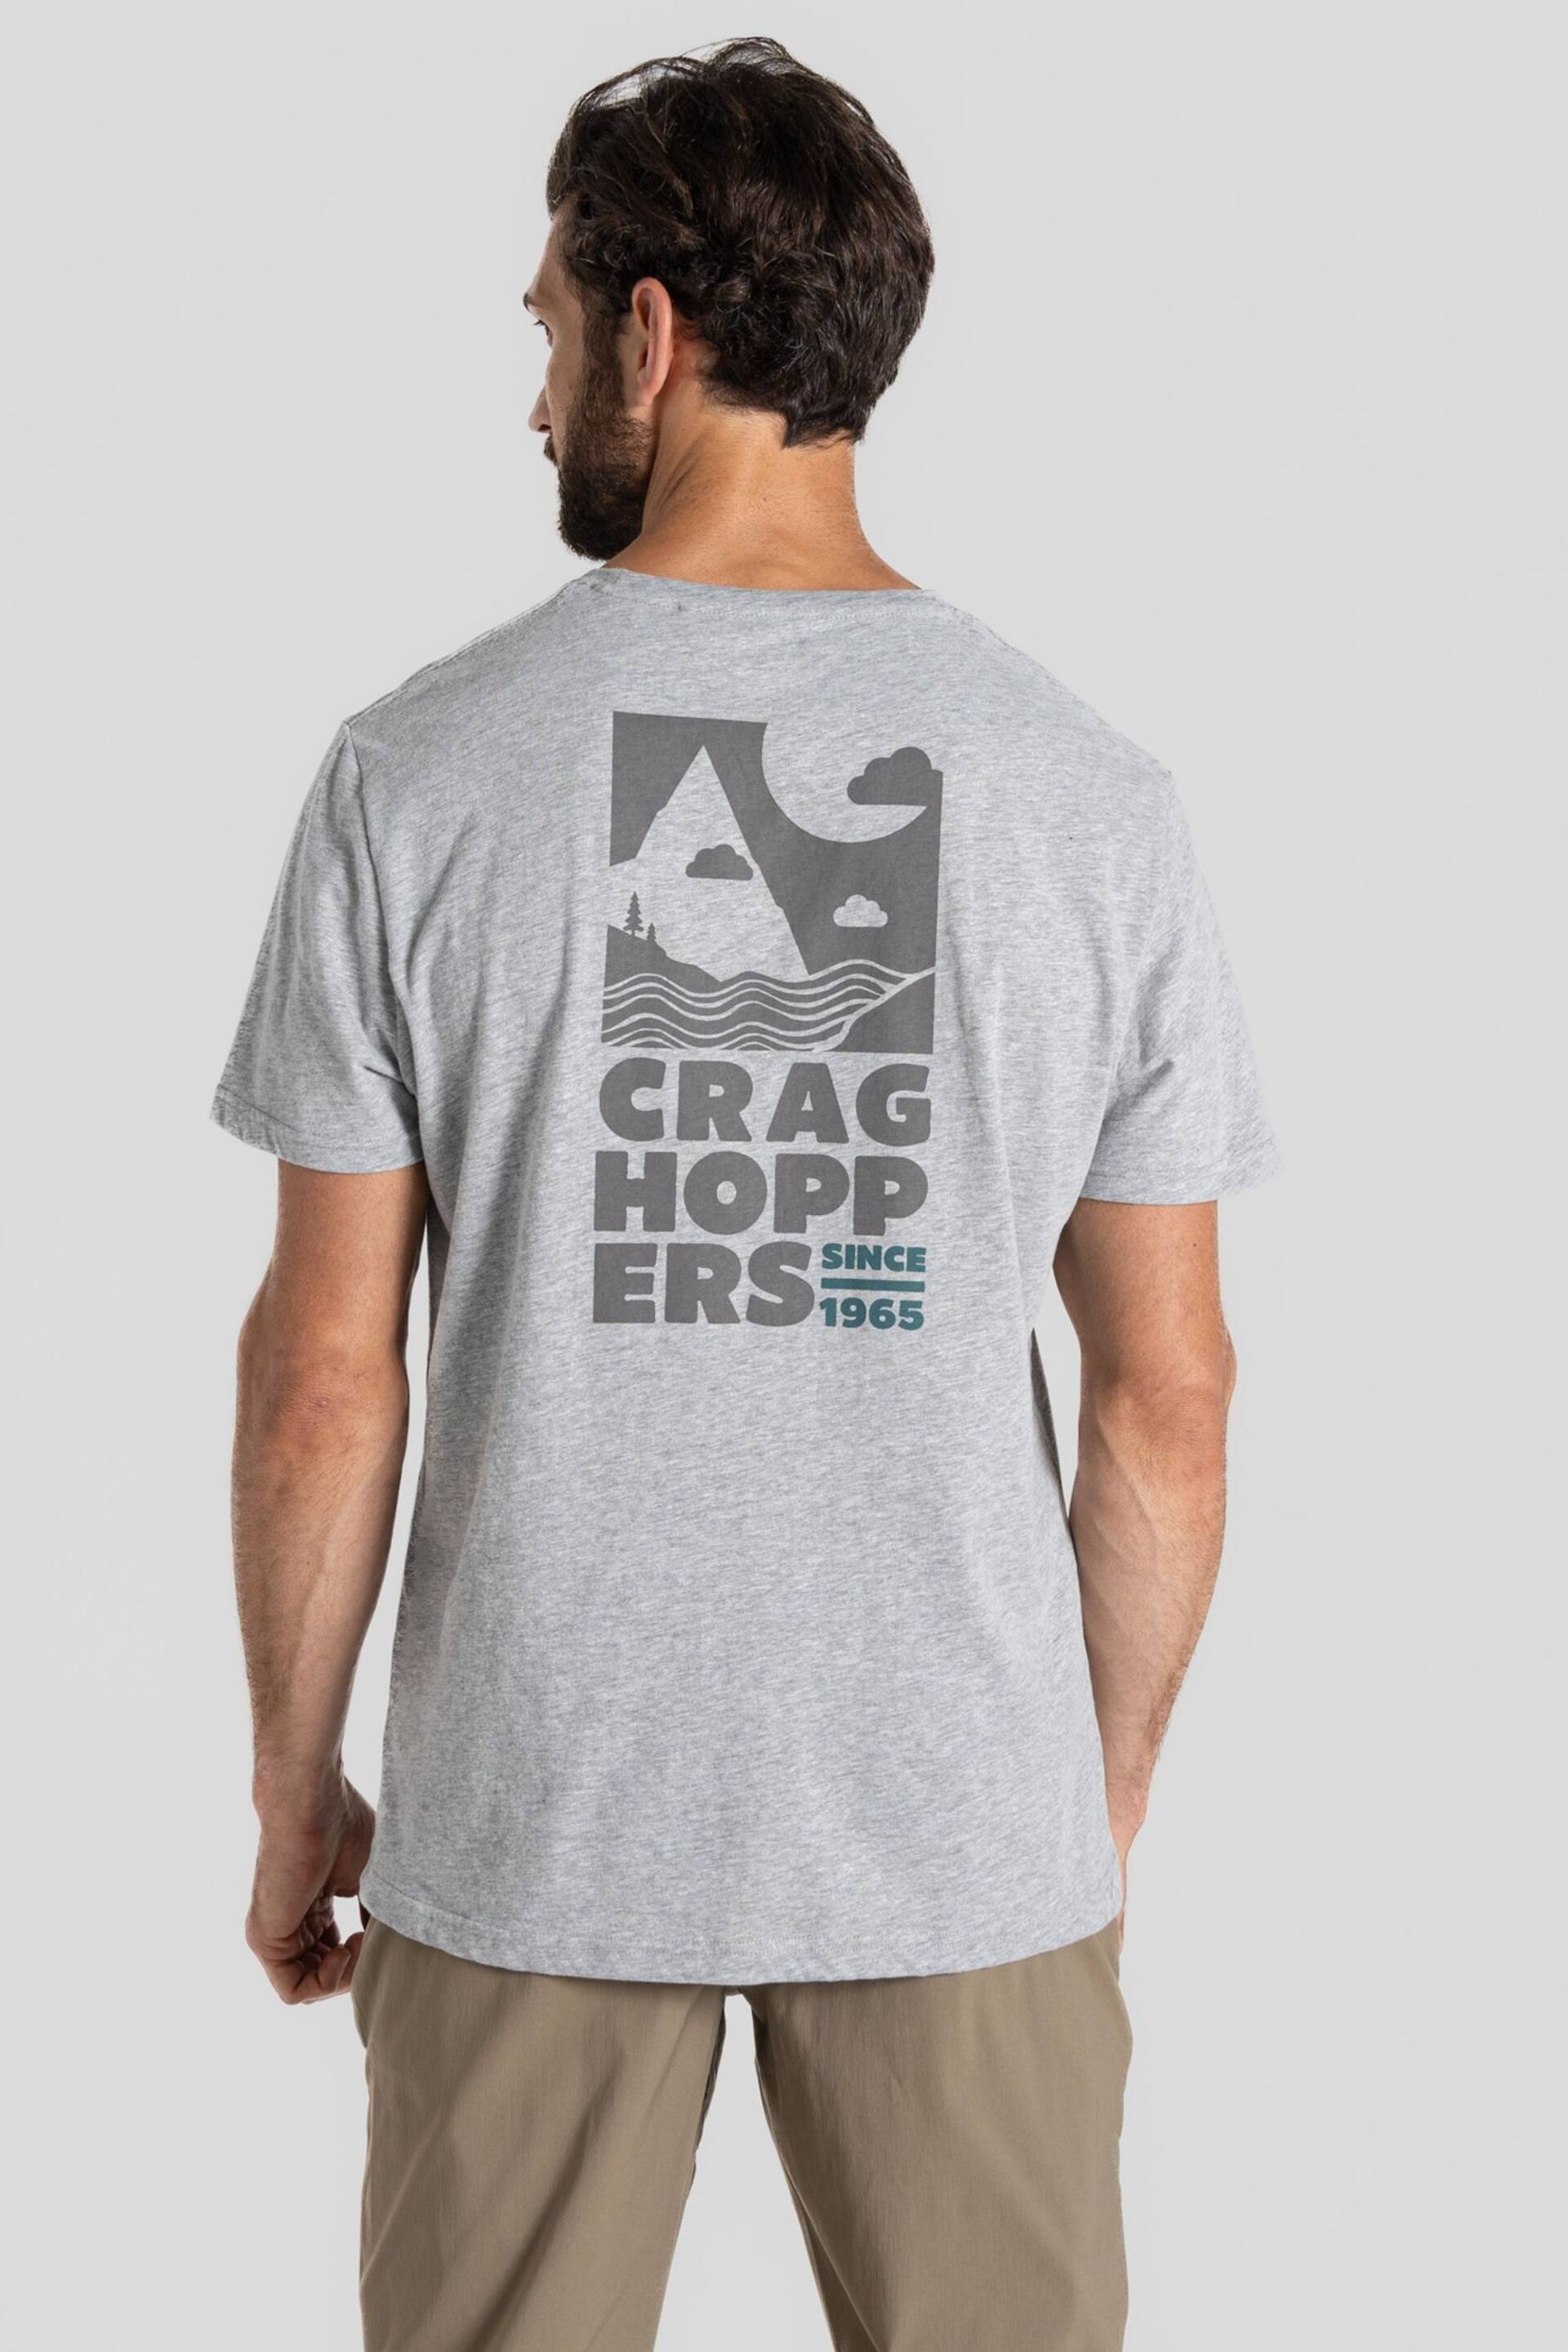 Craghoppers Grey Lucent Short Sleeve T-Shirt - Image 2 of 5